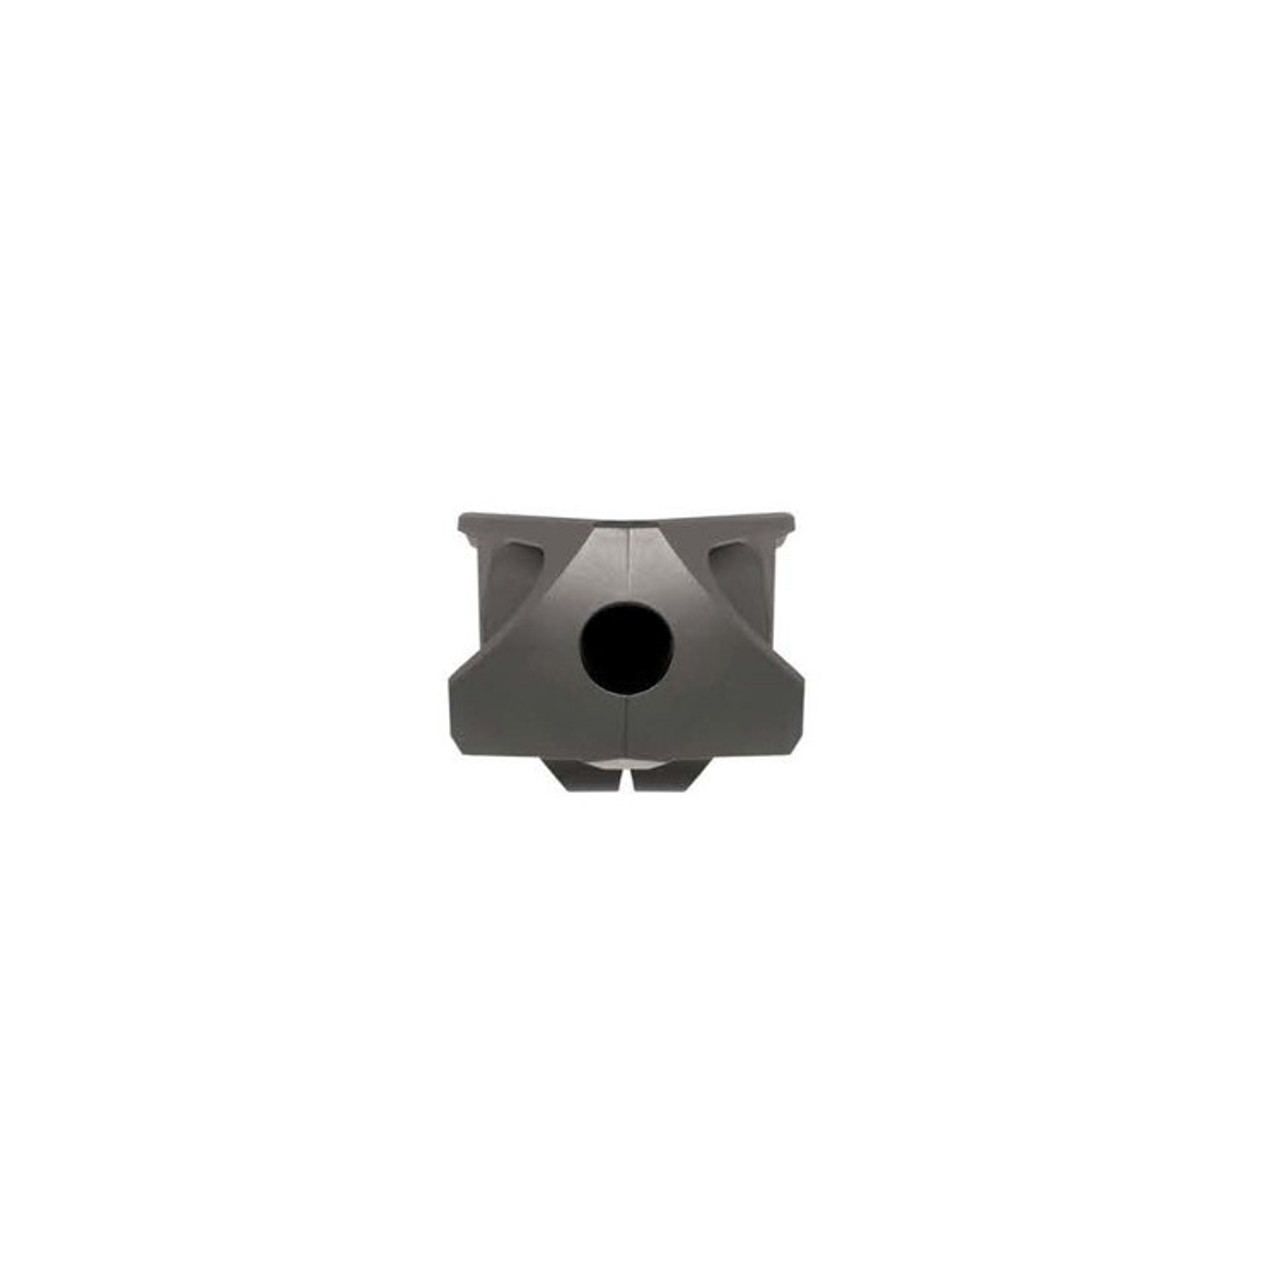 Cadex MX-1 Muzzle Break for calibers for .50 cal BMG available